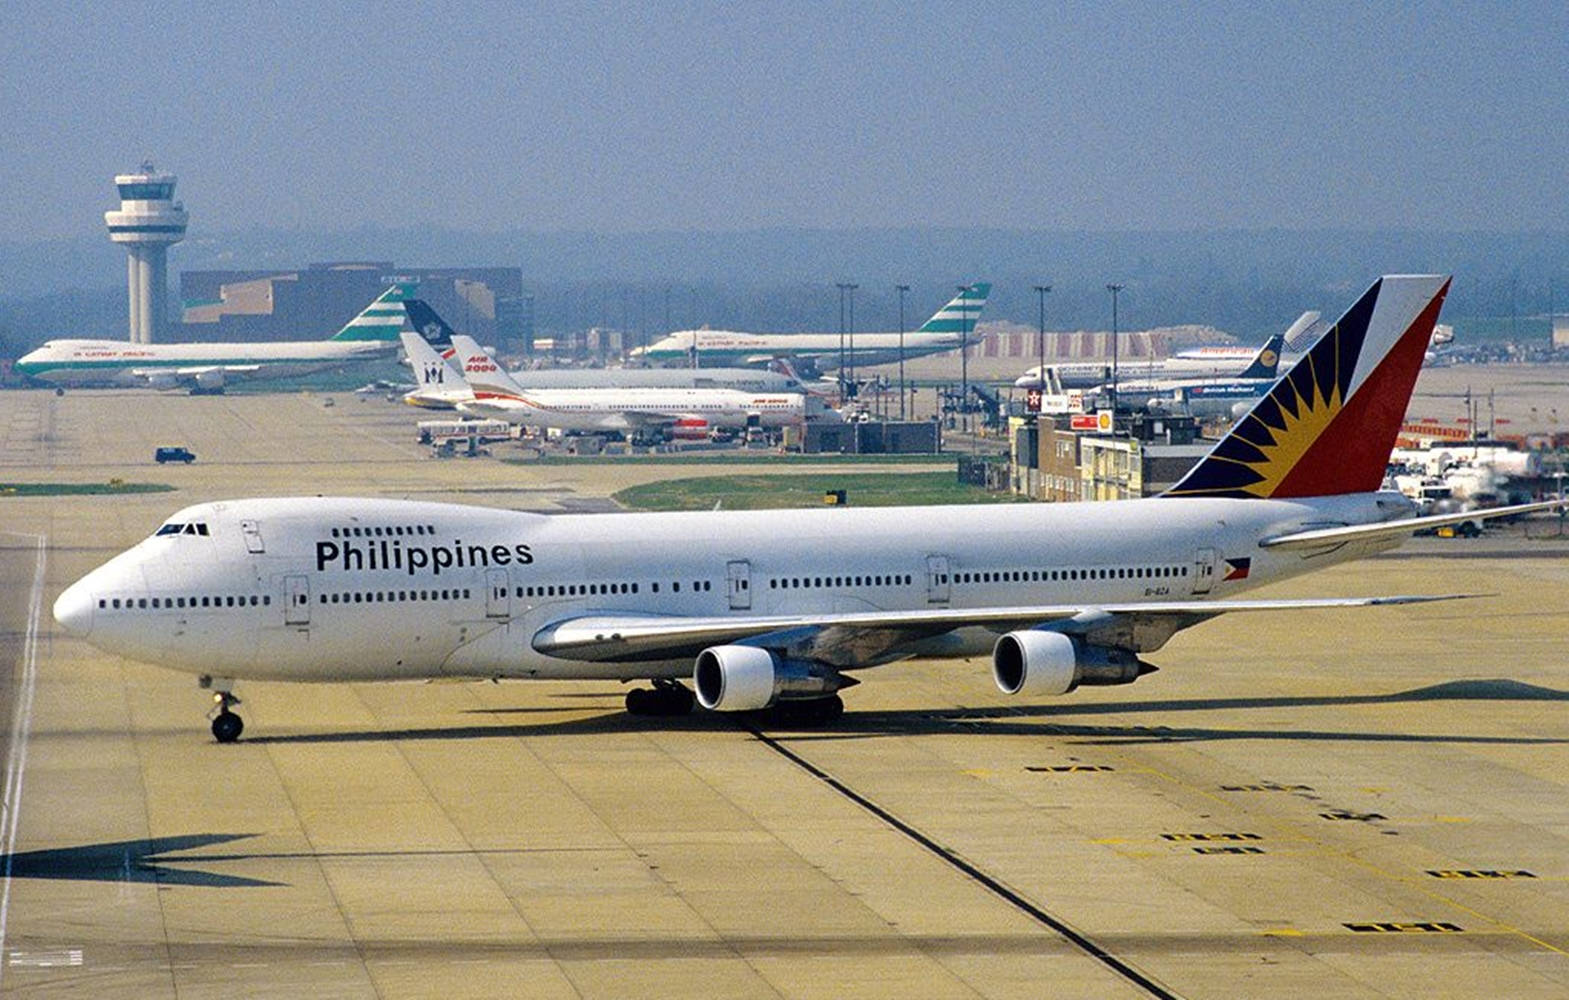 Philippine airlines. Боинг 747 Филиппины. Самолет Philippines Airlines. Philippines a300.